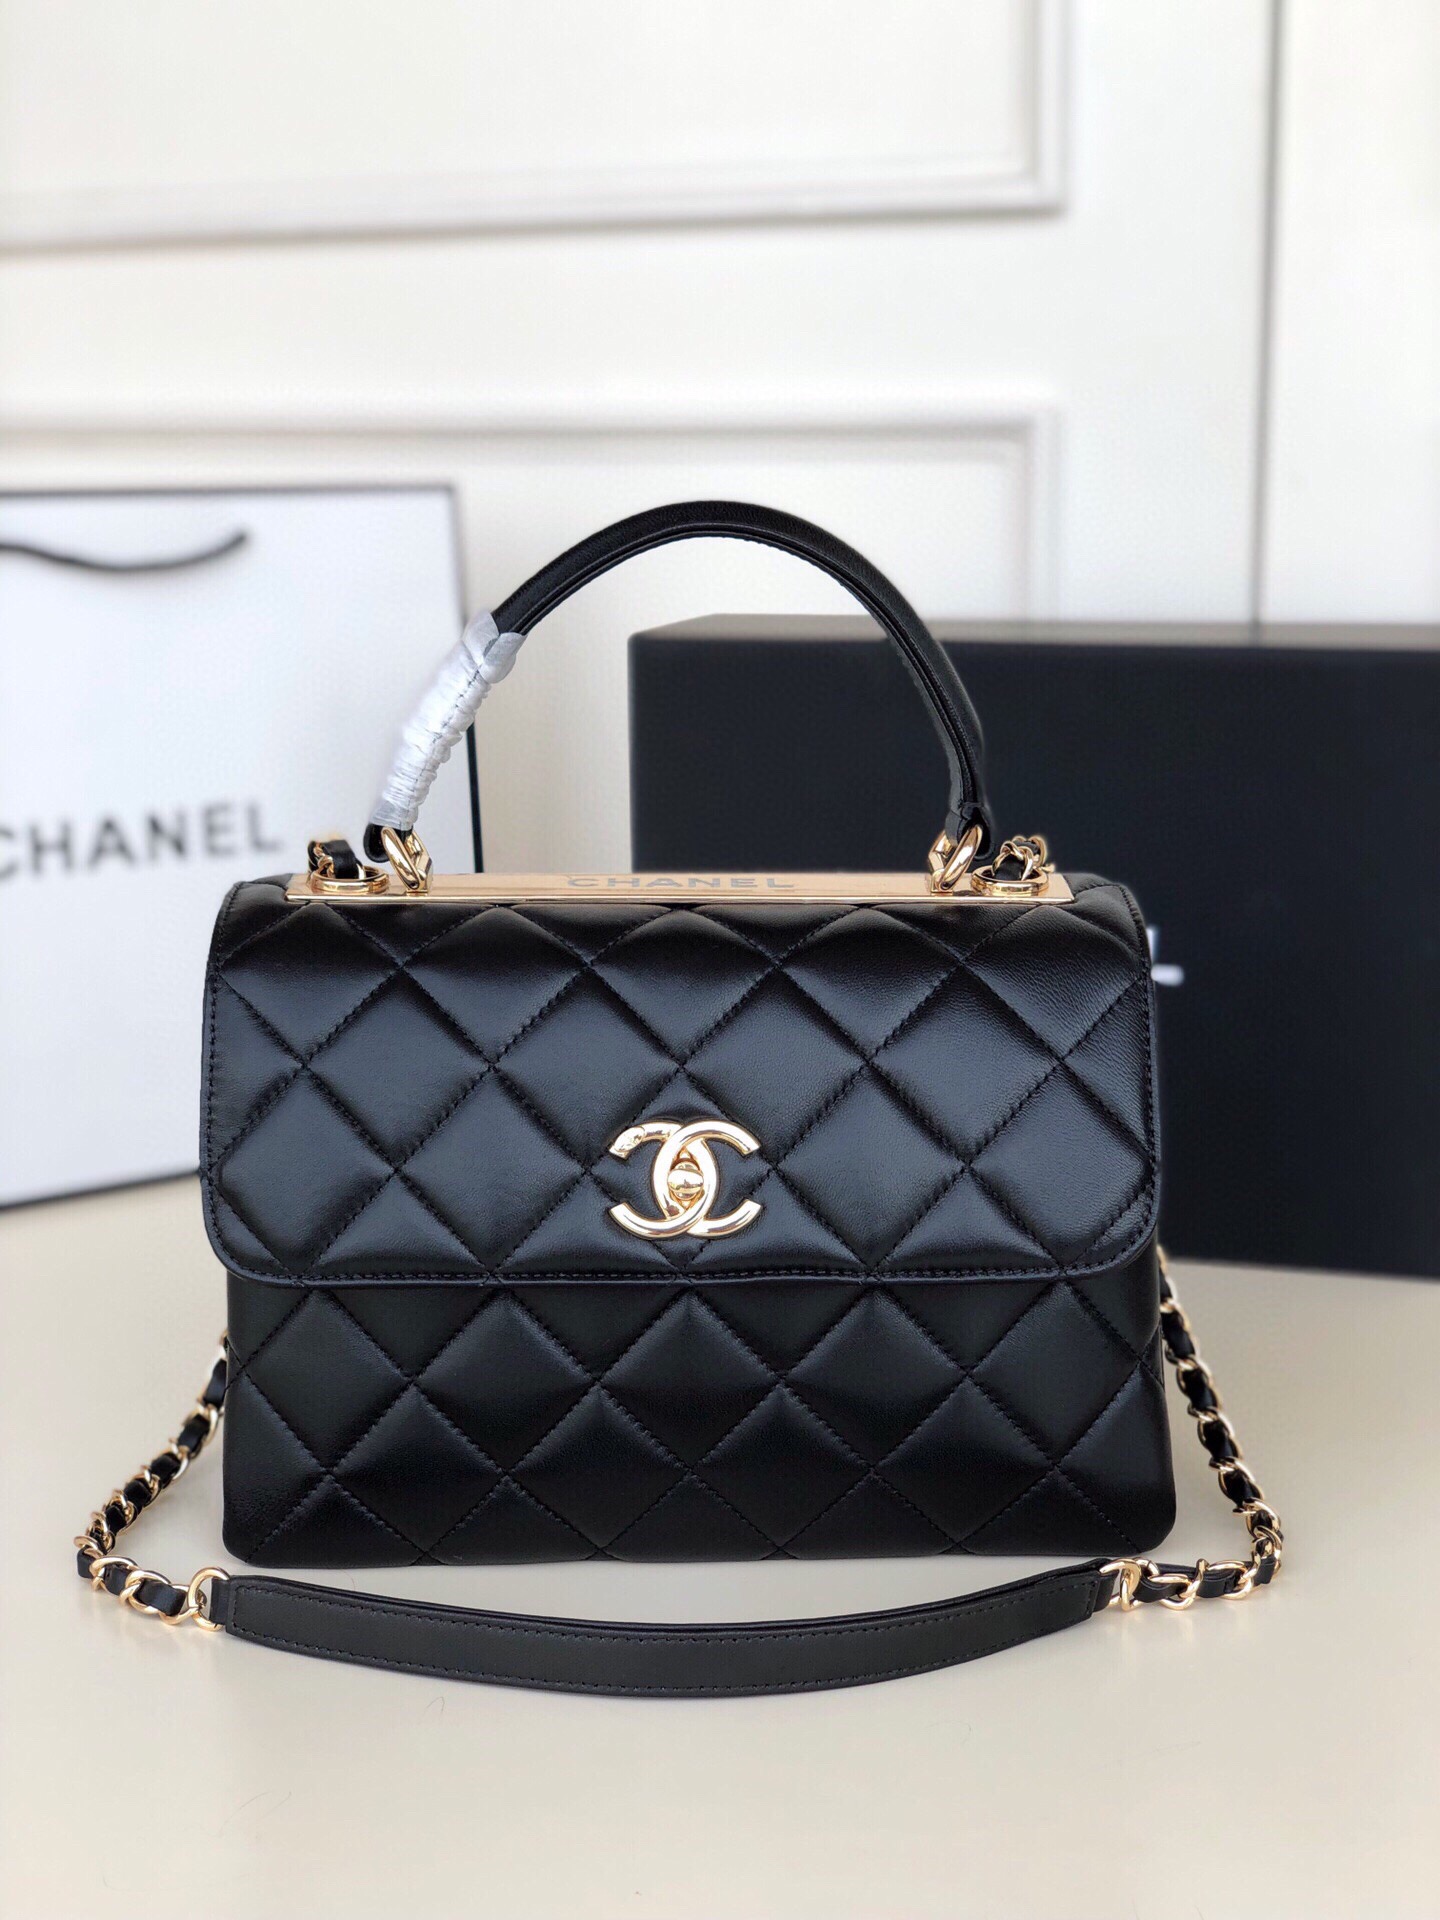 Chanel Flap Bag with Top Handle C92236A-black – LuxTime DFO Handbags